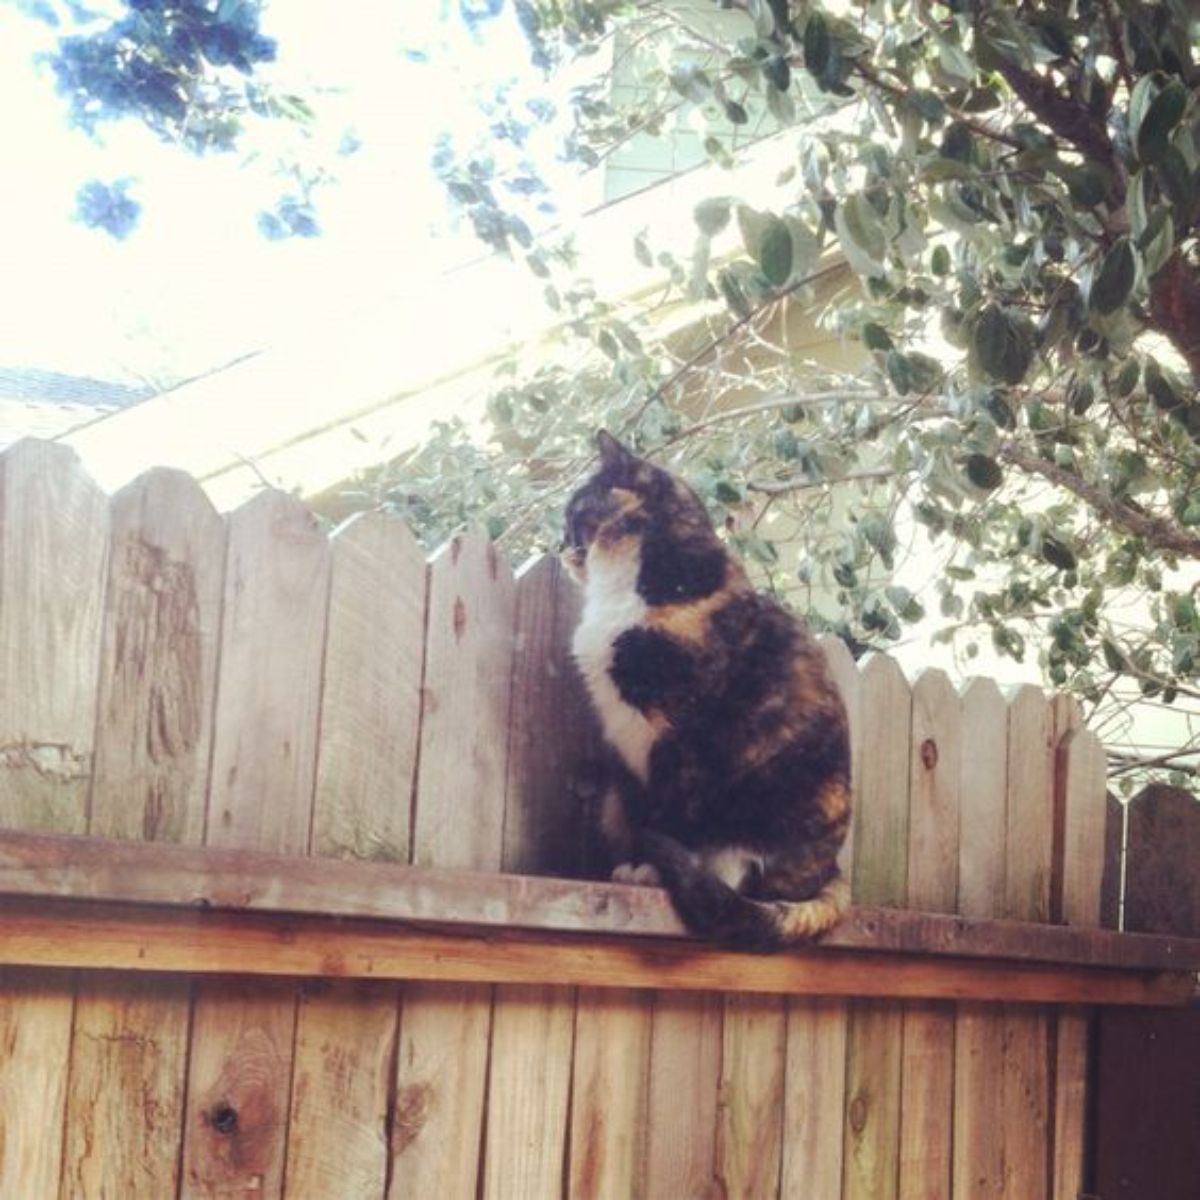 white black and orange cat sitting on the ledge of a wooden fence and peeking over the top